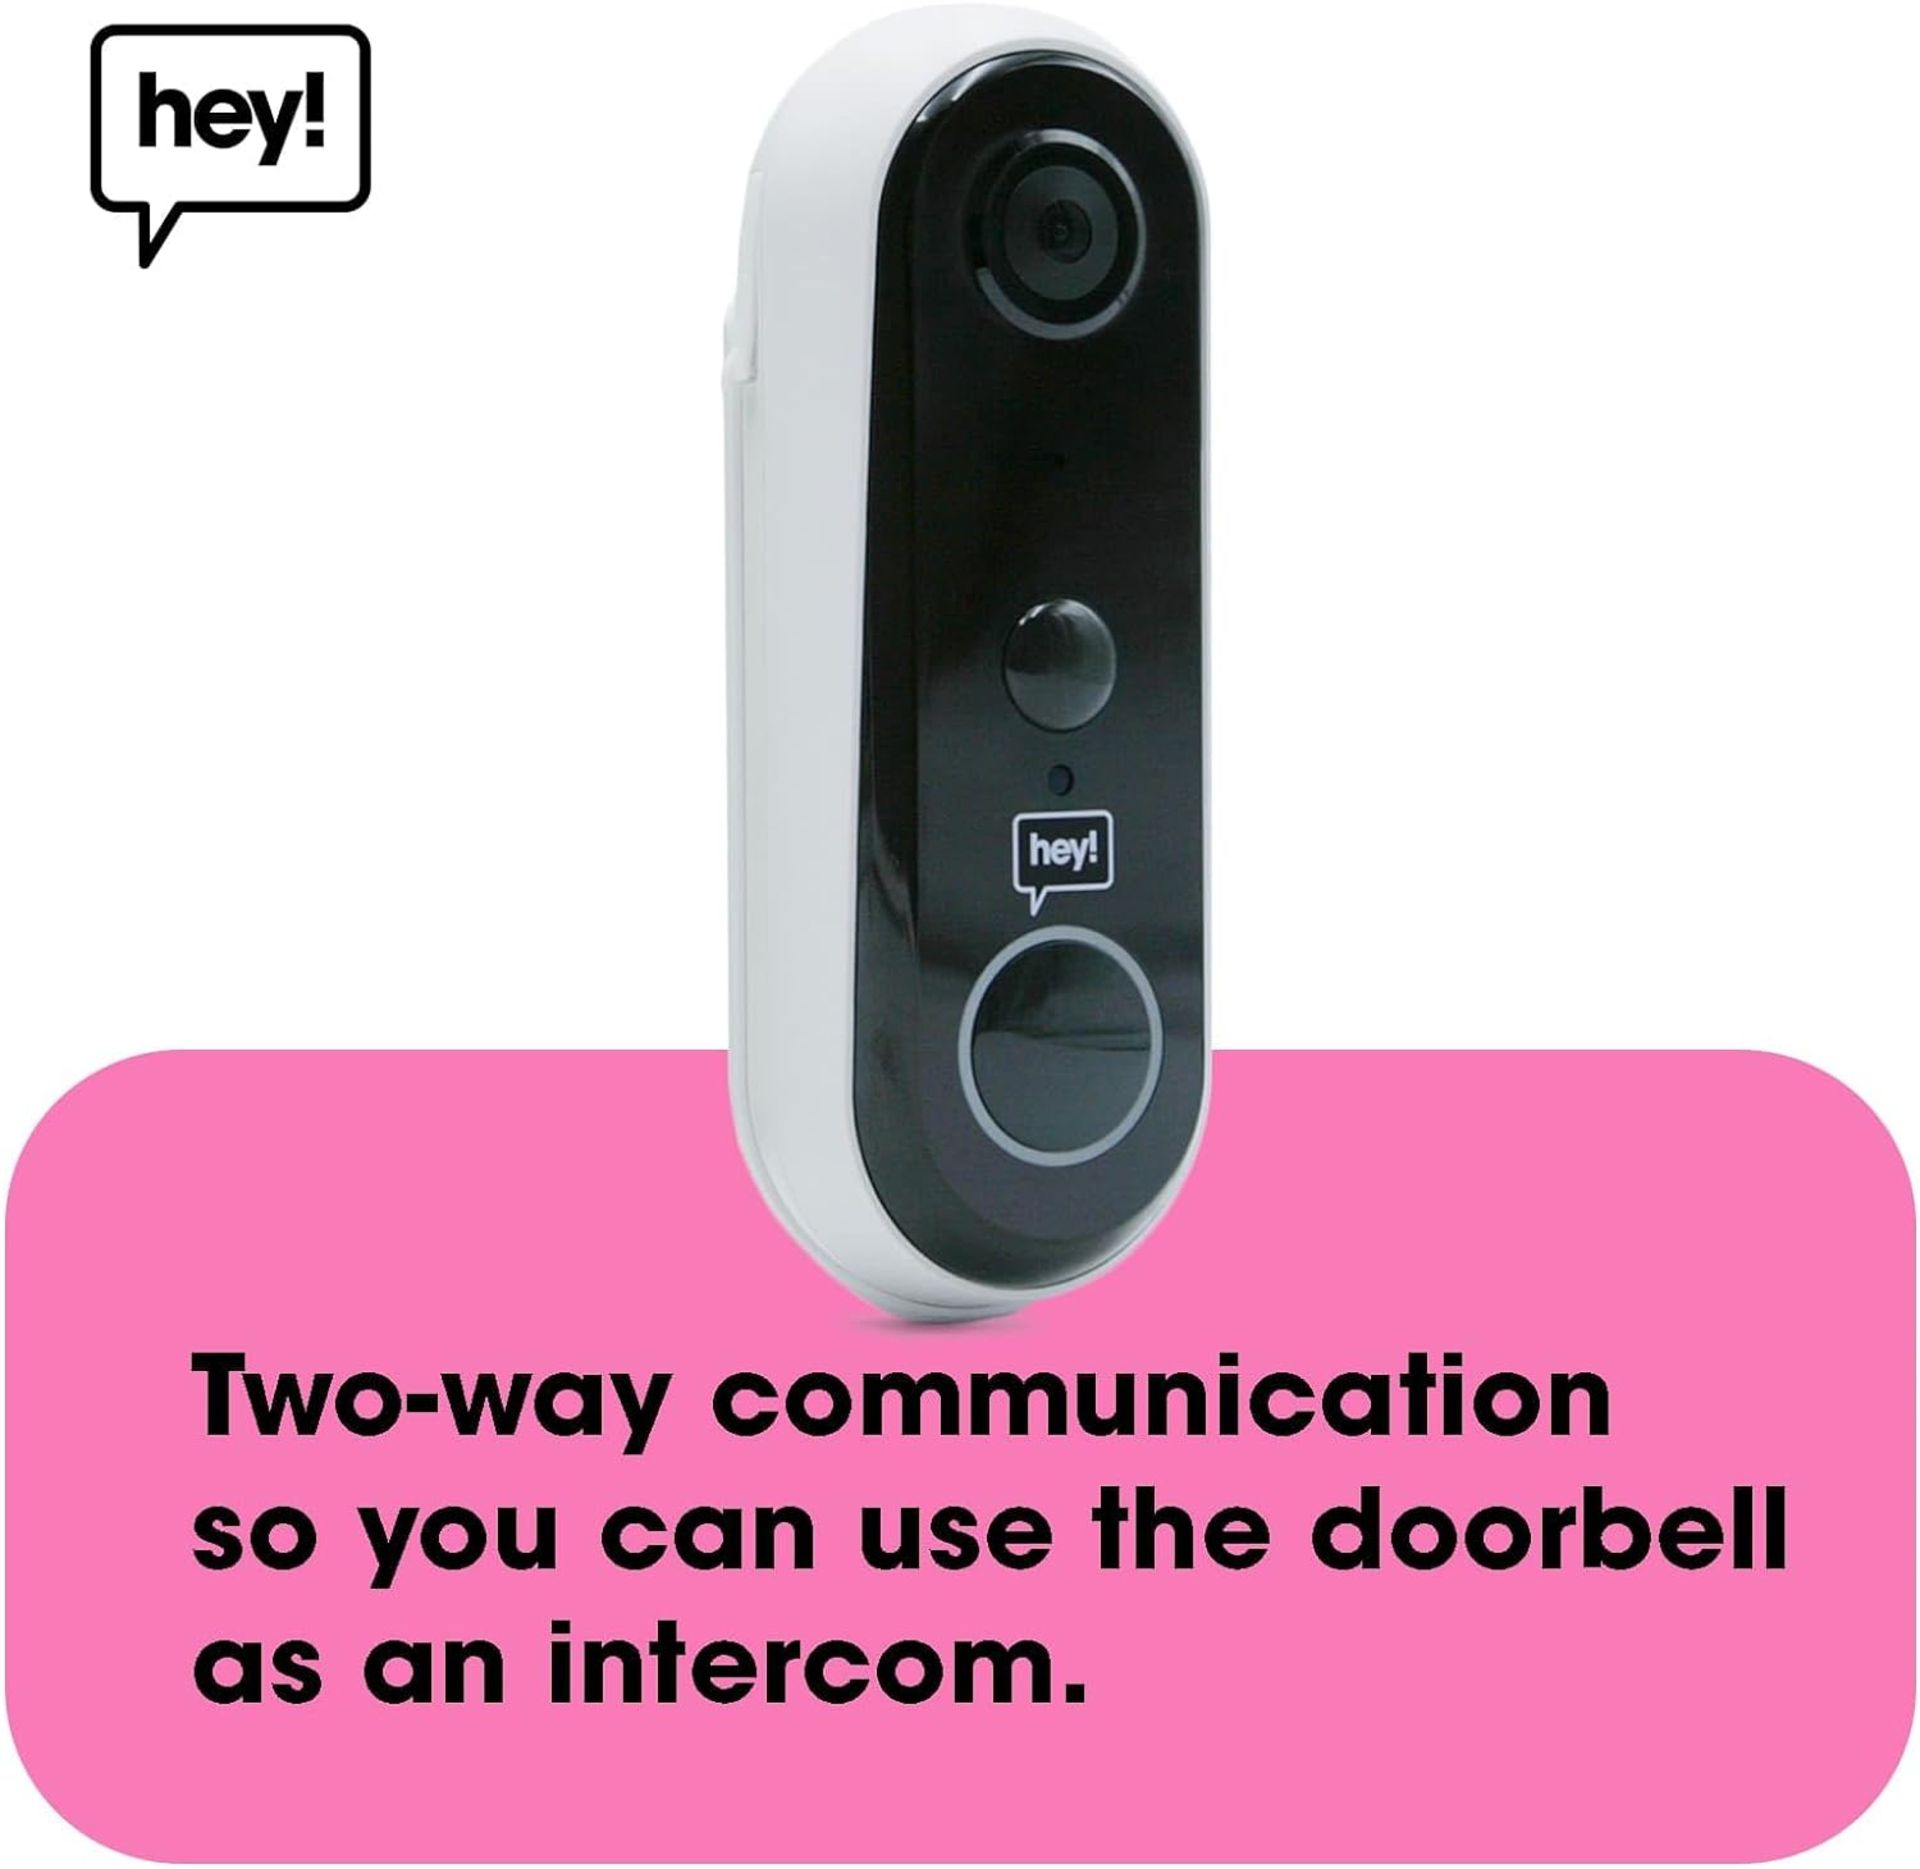 TRADE LOT TO CONTAIN 15x NEW & BOXED HEY! SMART Wireless Video Doorbell. RRP £79.99 EACH. Wifi - Image 5 of 6